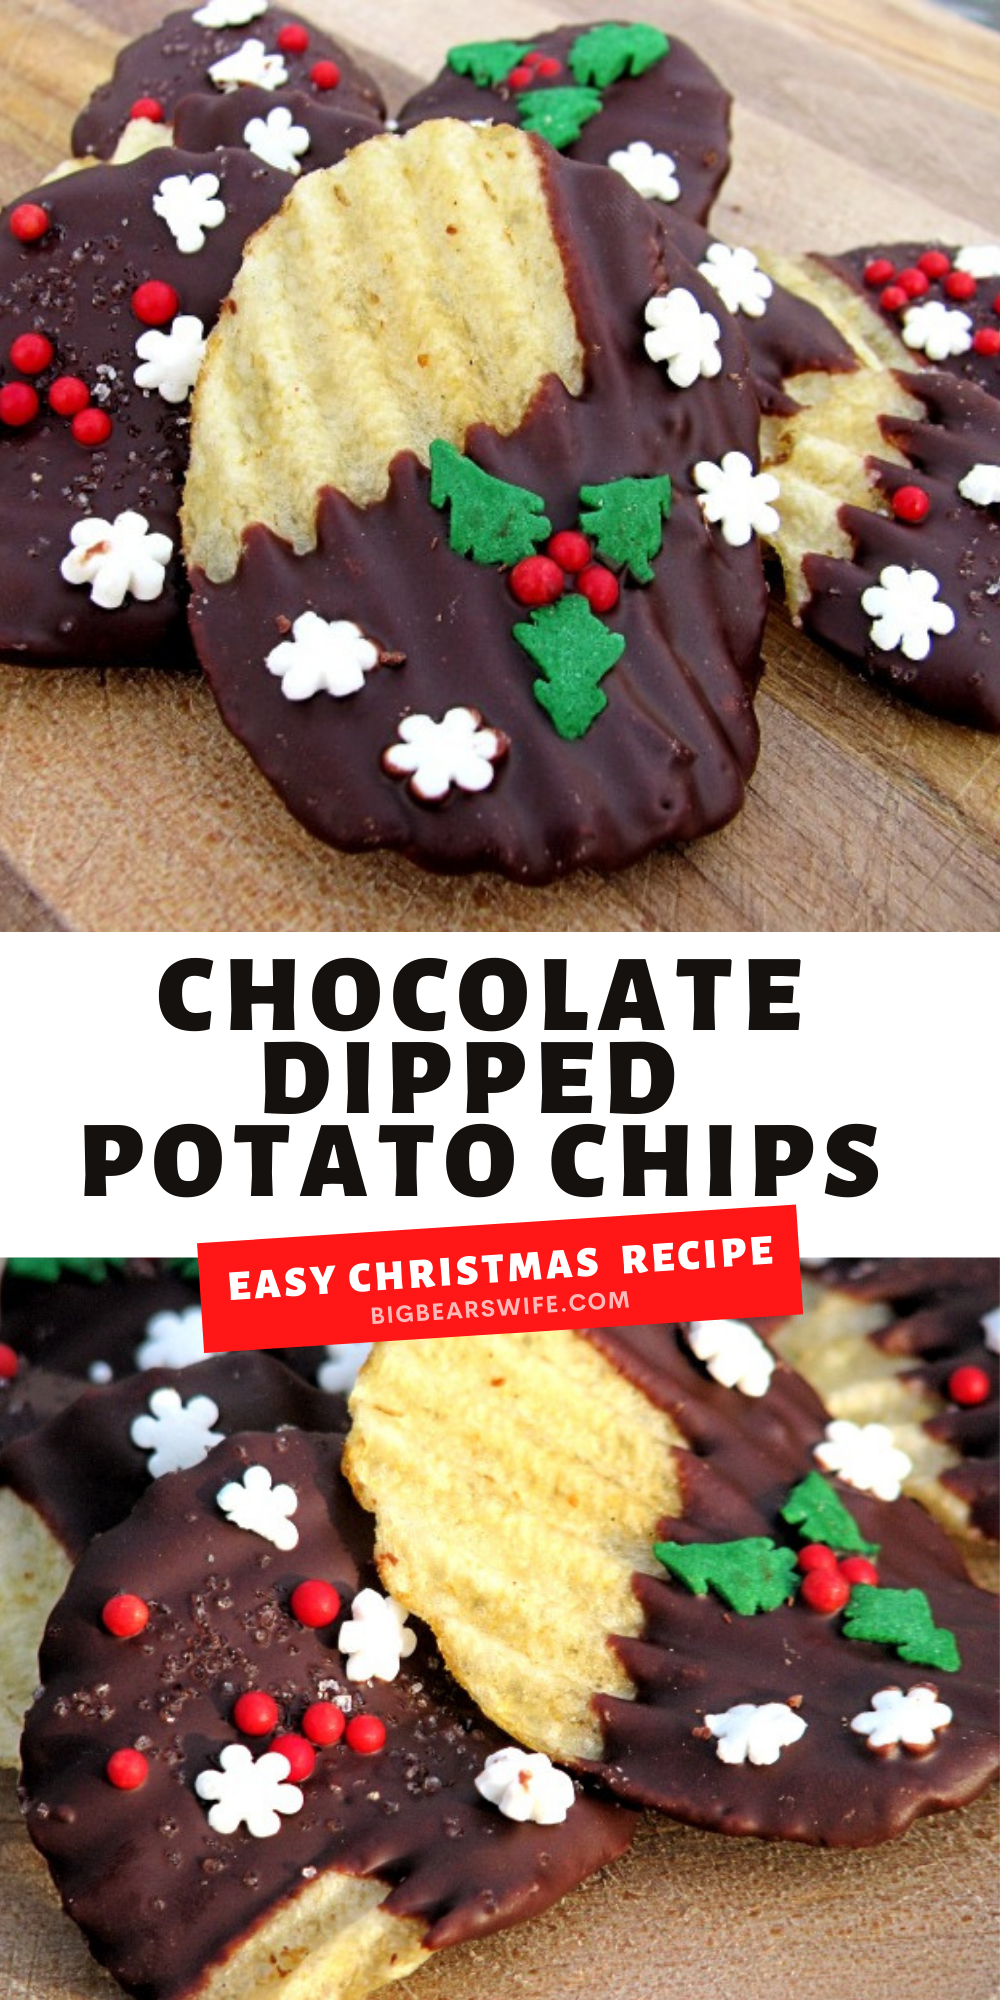 Chocolate Dipped Potato Chips are a super easy treat to make at home! Perfect for Holiday Dessert trays and homemade Christmas gifts!  via @bigbearswife